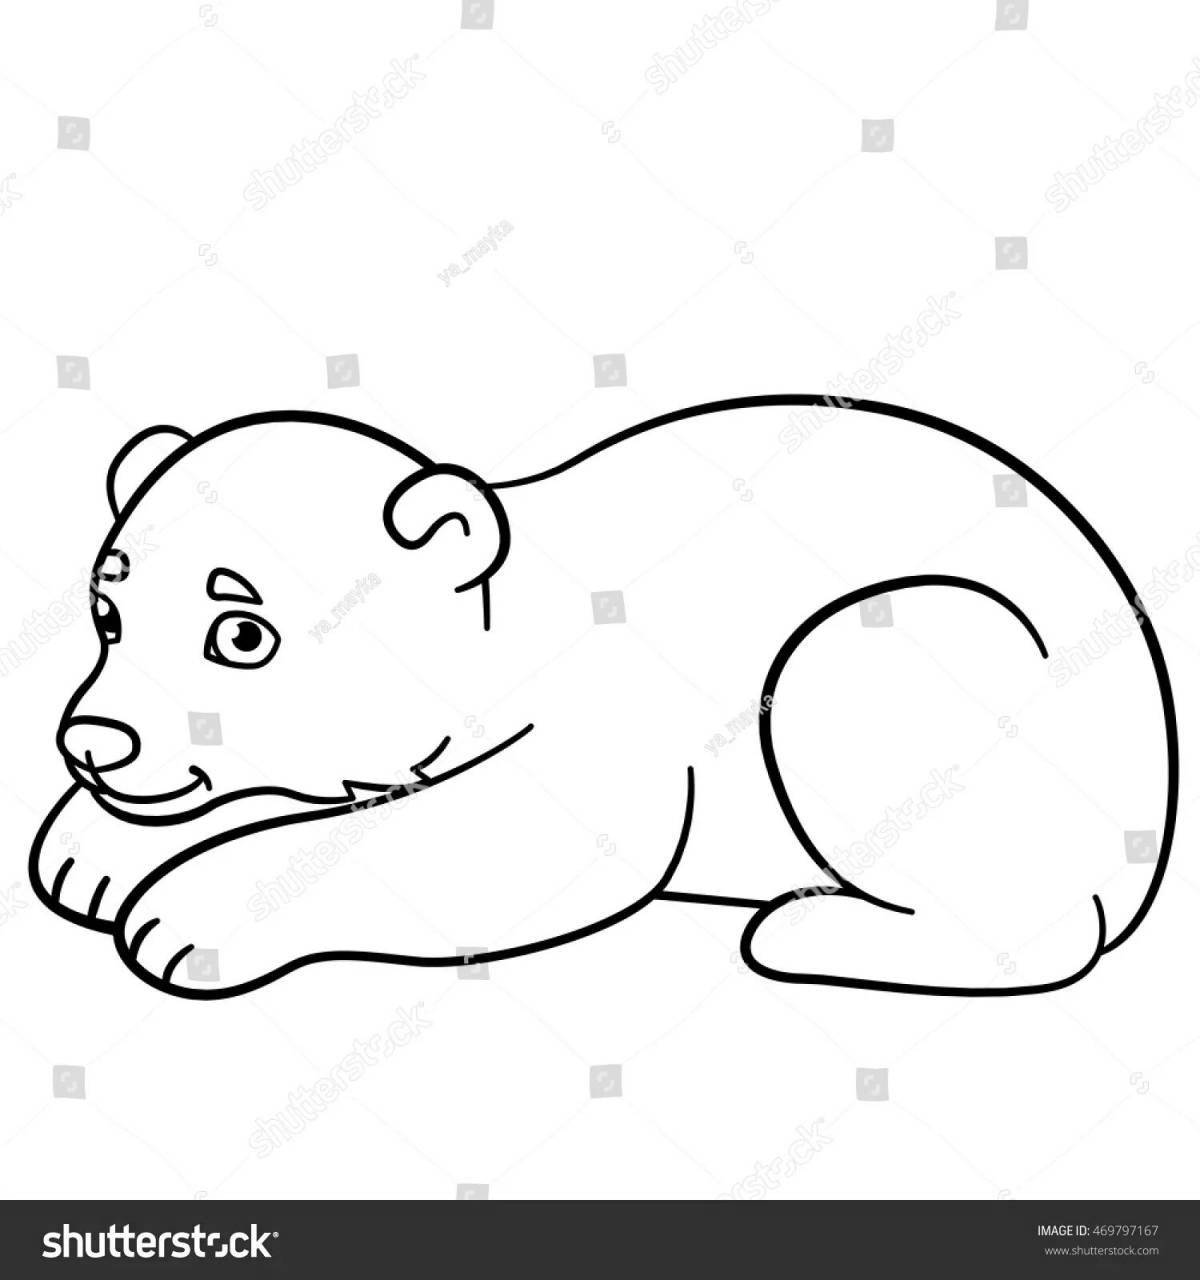 Fun bear den coloring page for babies